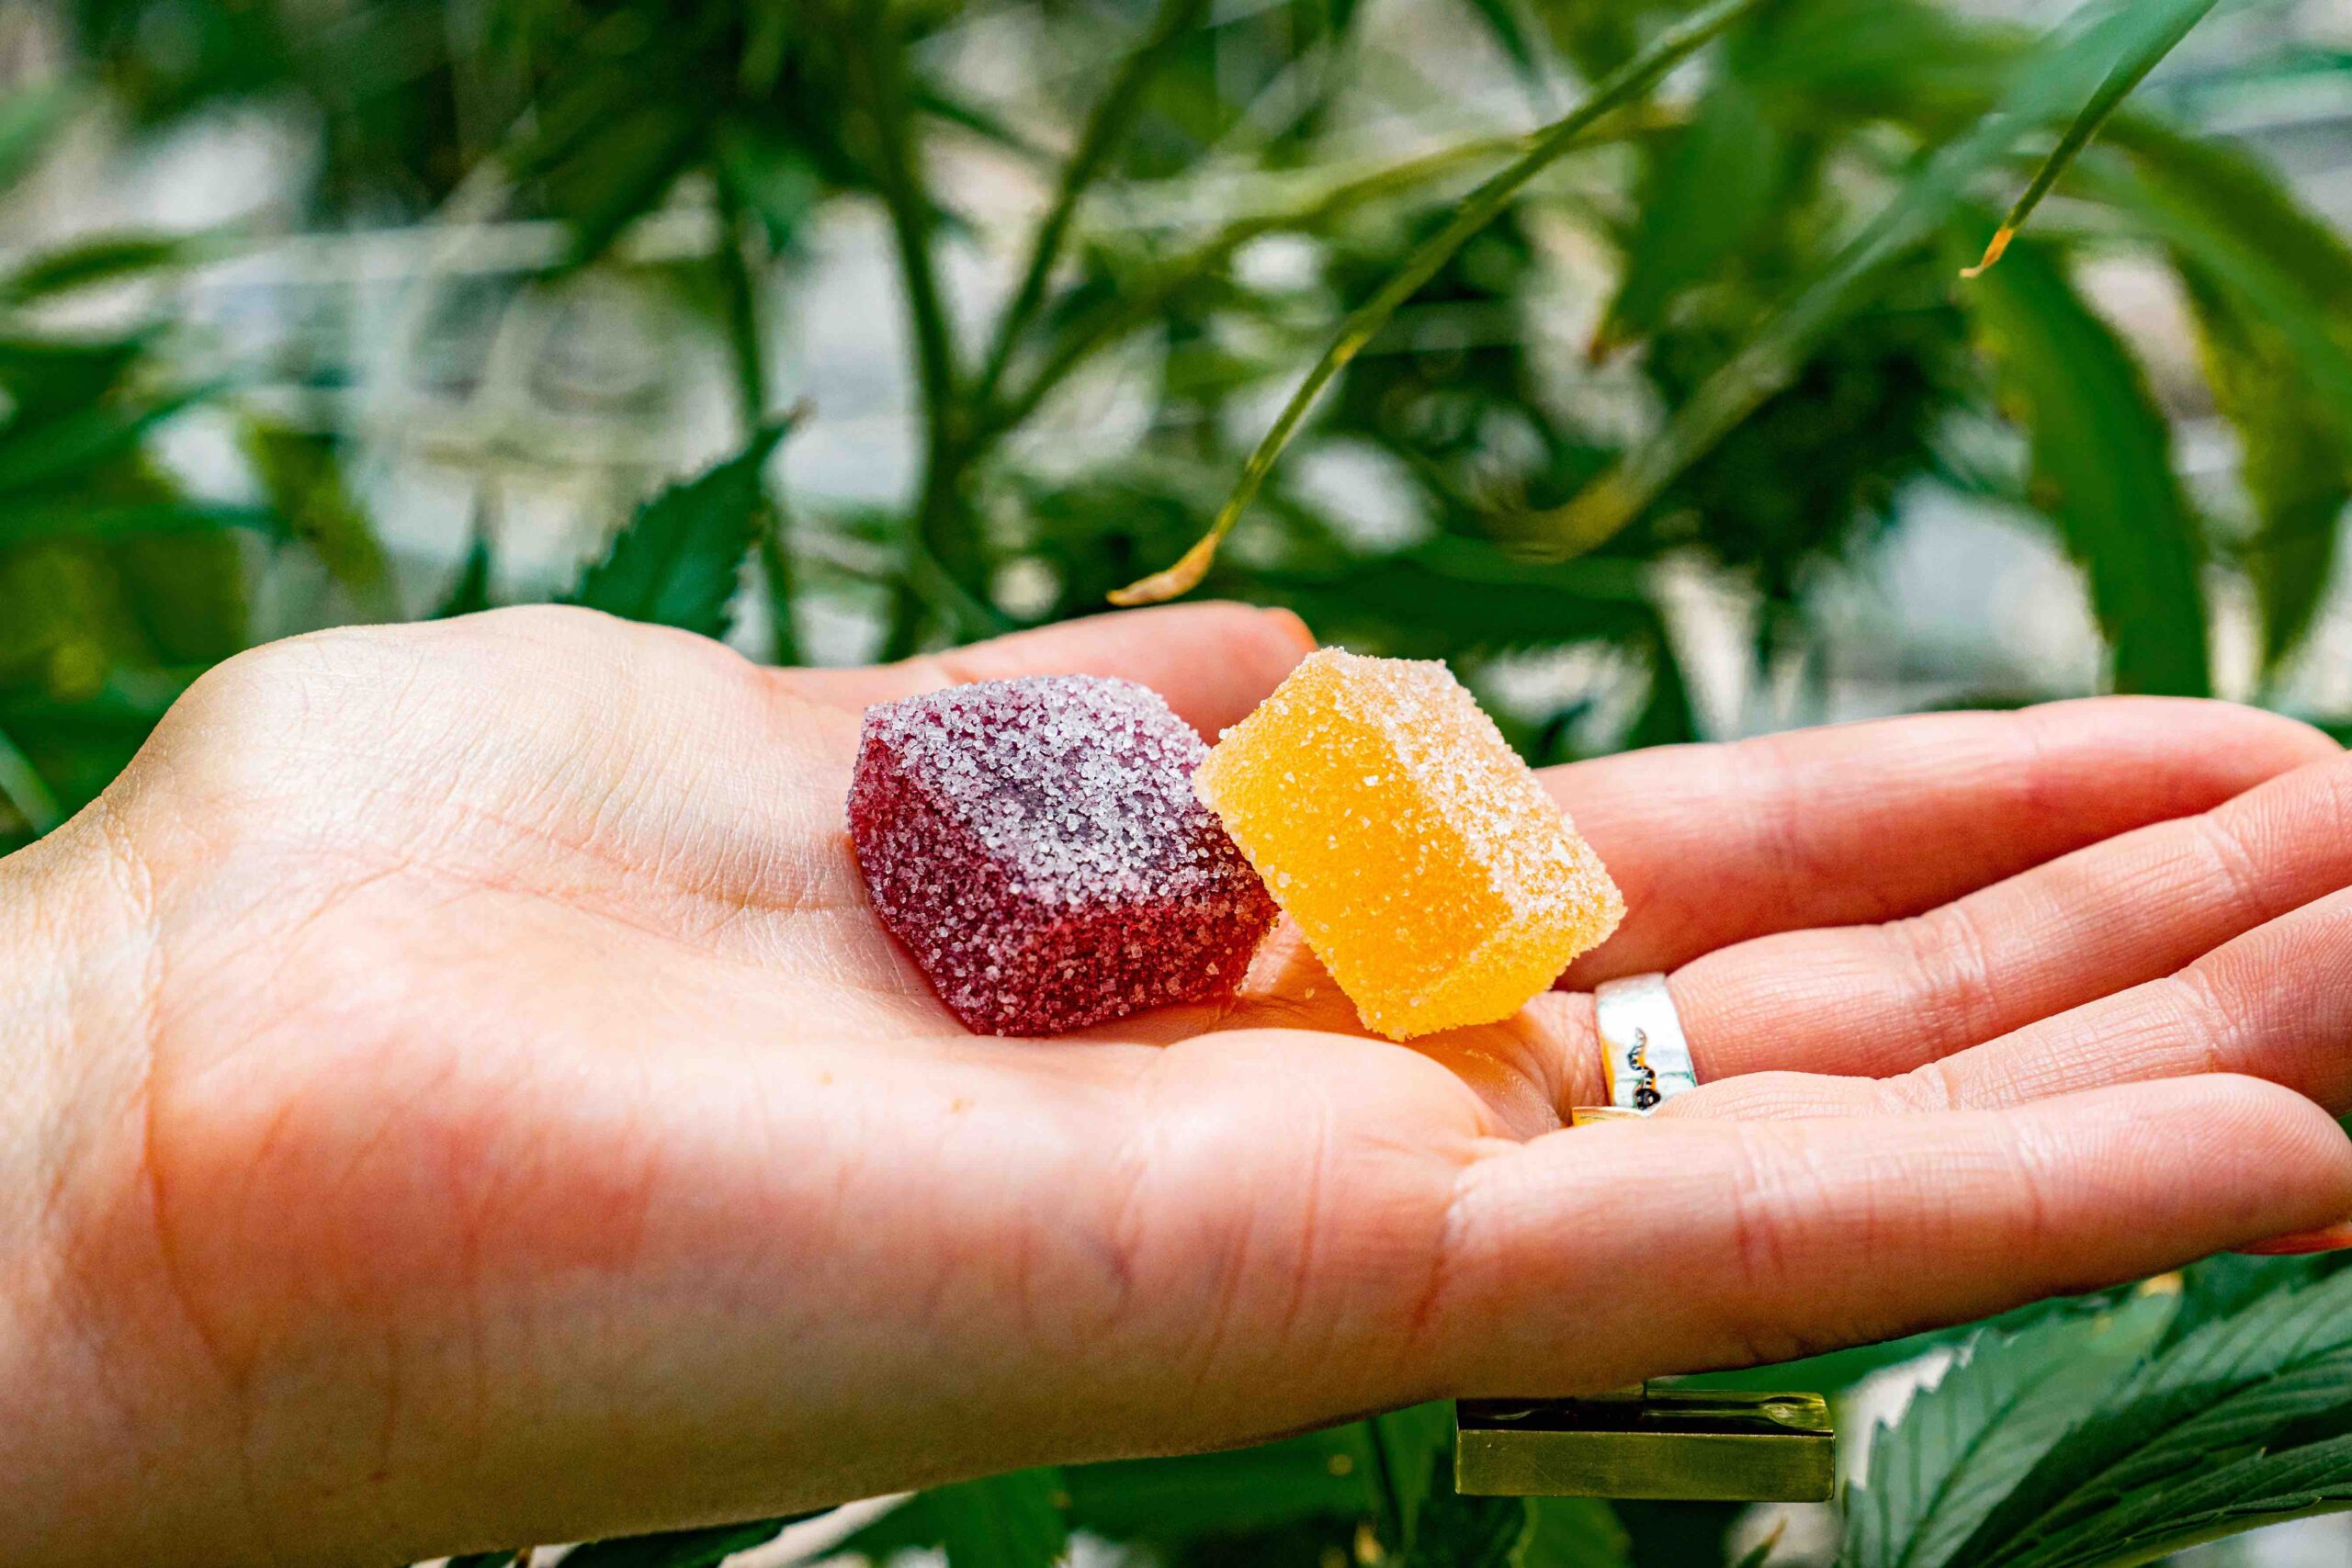 Can edibles really be strain-specific, or is that just hype? | Leafly